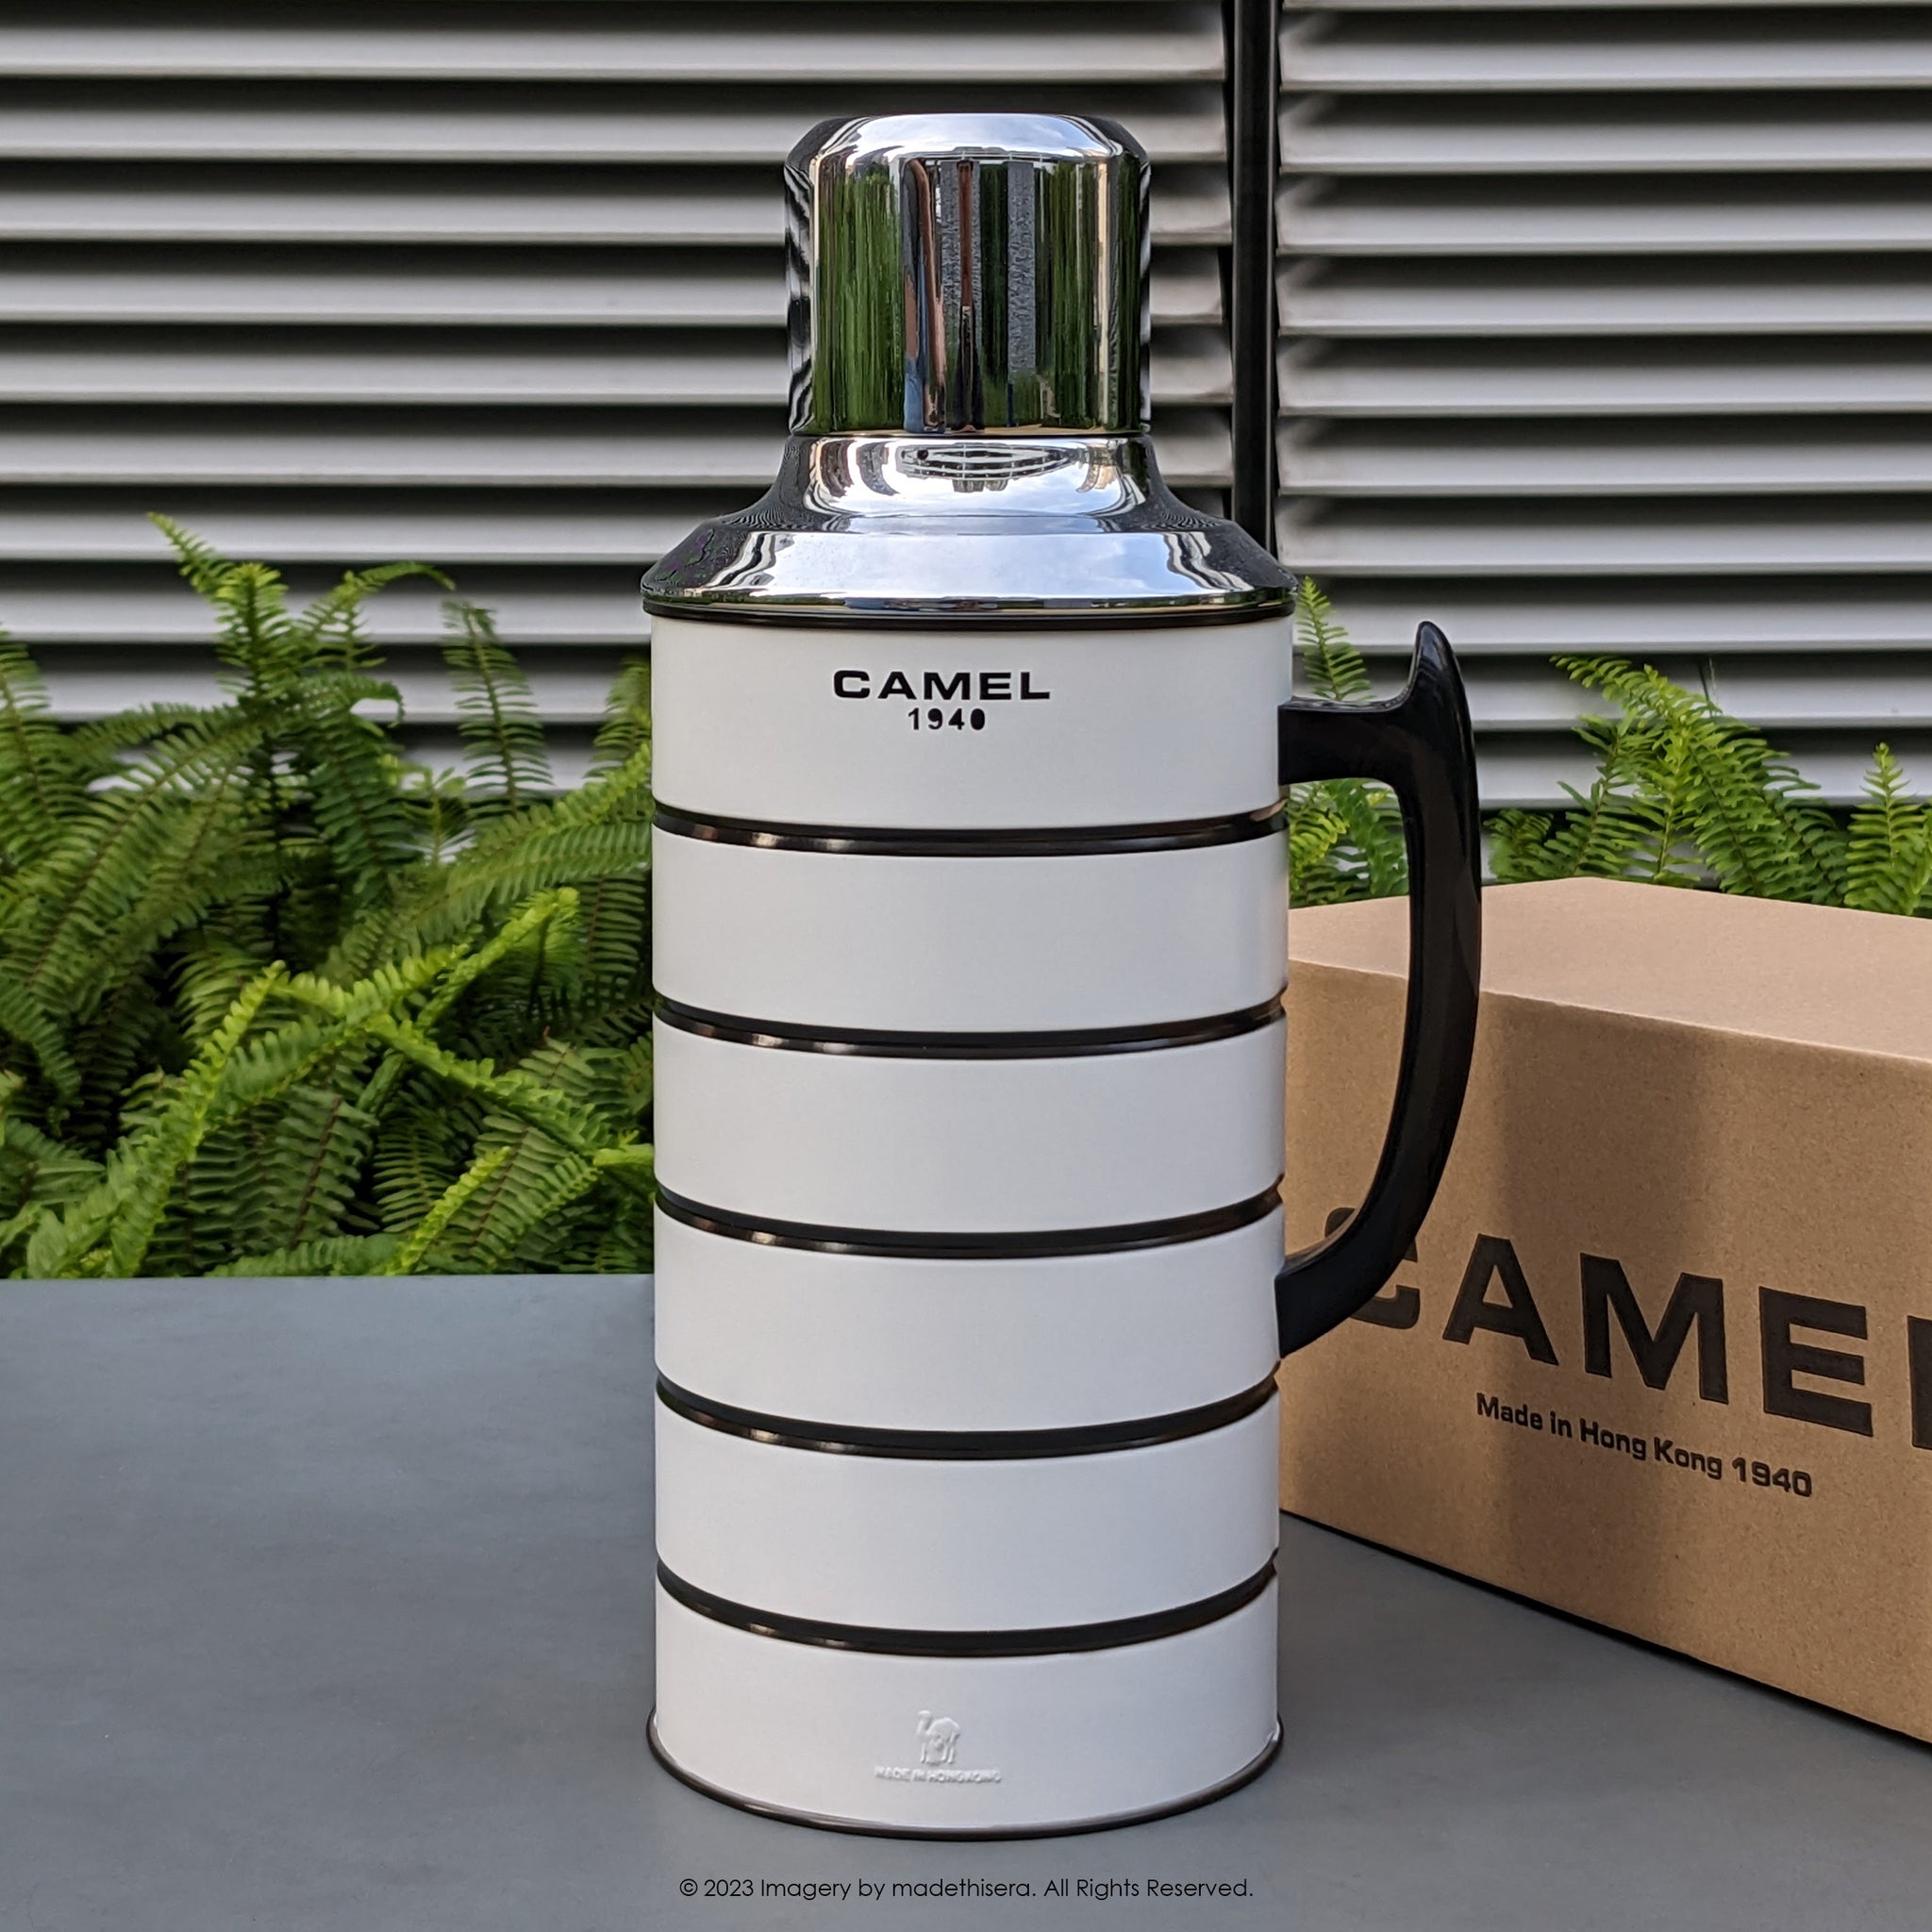 Camel 駱駝牌 412 Vacuum Thermal Flask 真空保溫壺 412WH 1.5L (White 白色) [Double Glass Wall Thermos Bottle 雙層玻璃暖水樽]